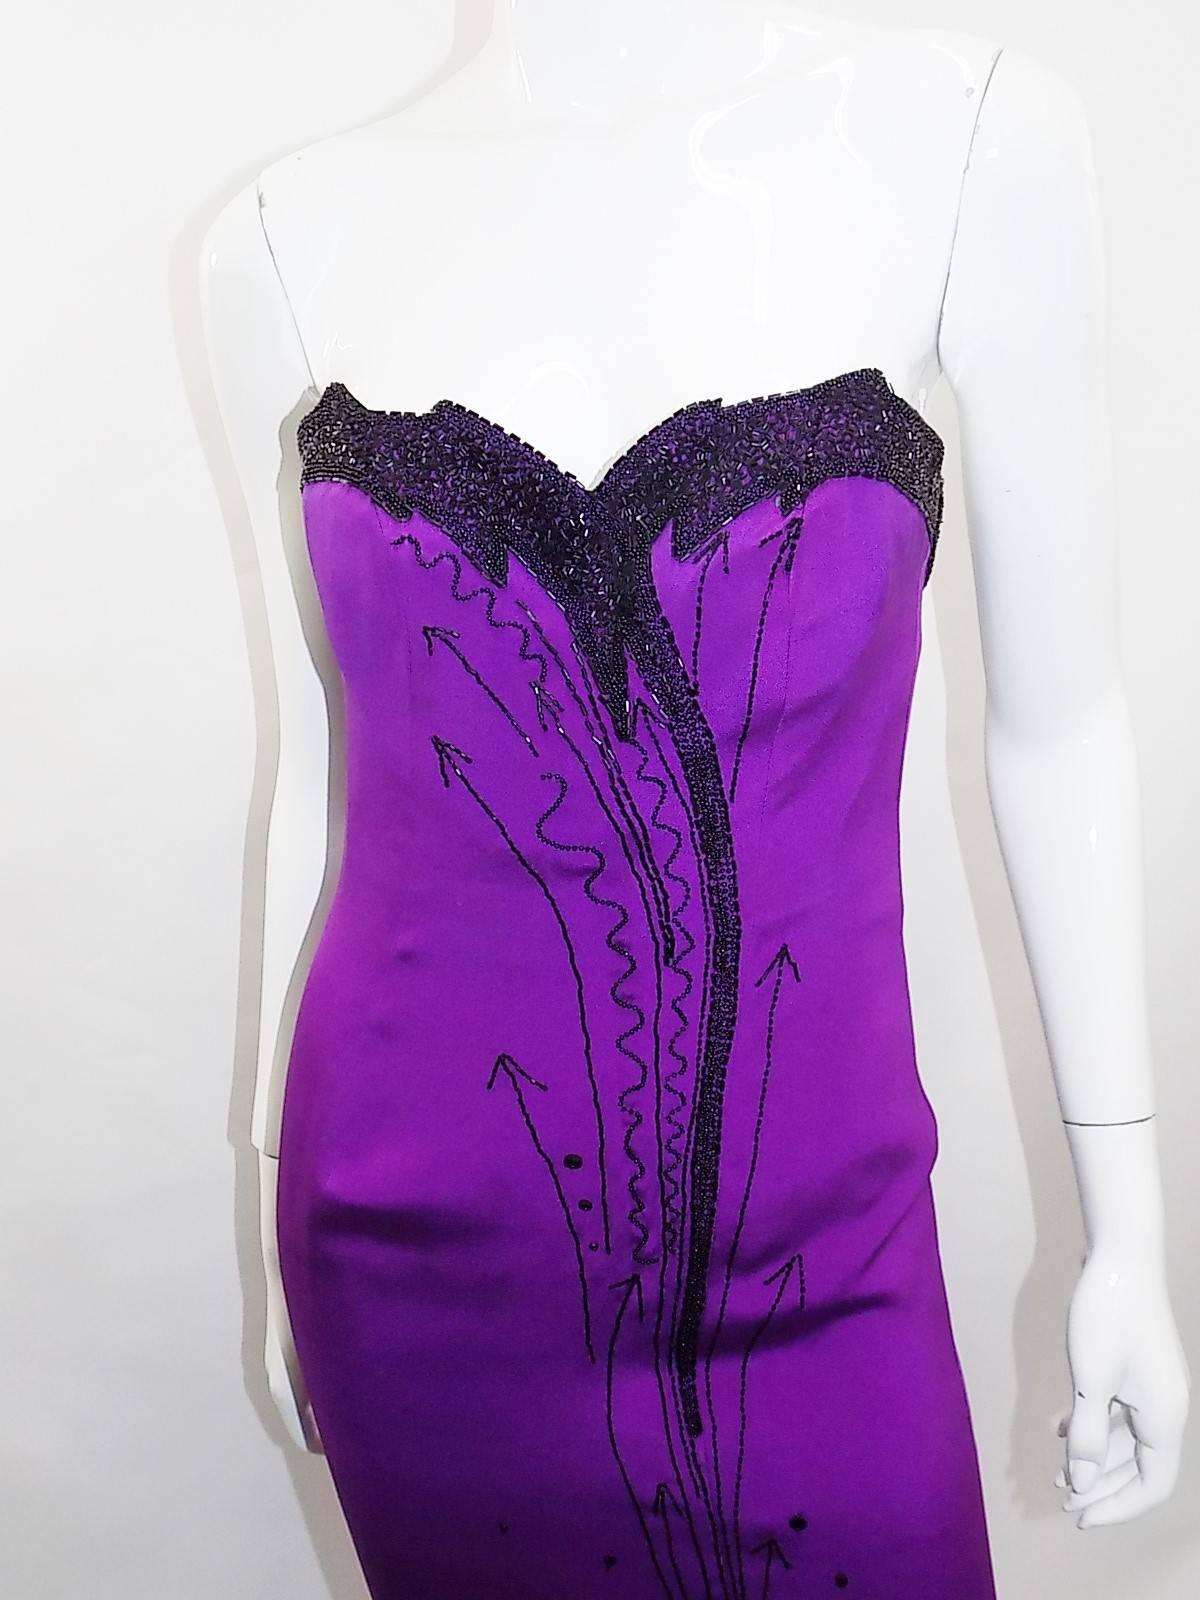 Fabrice Corset  Strapless Silk Beaded  Vintage Gown  Small 2